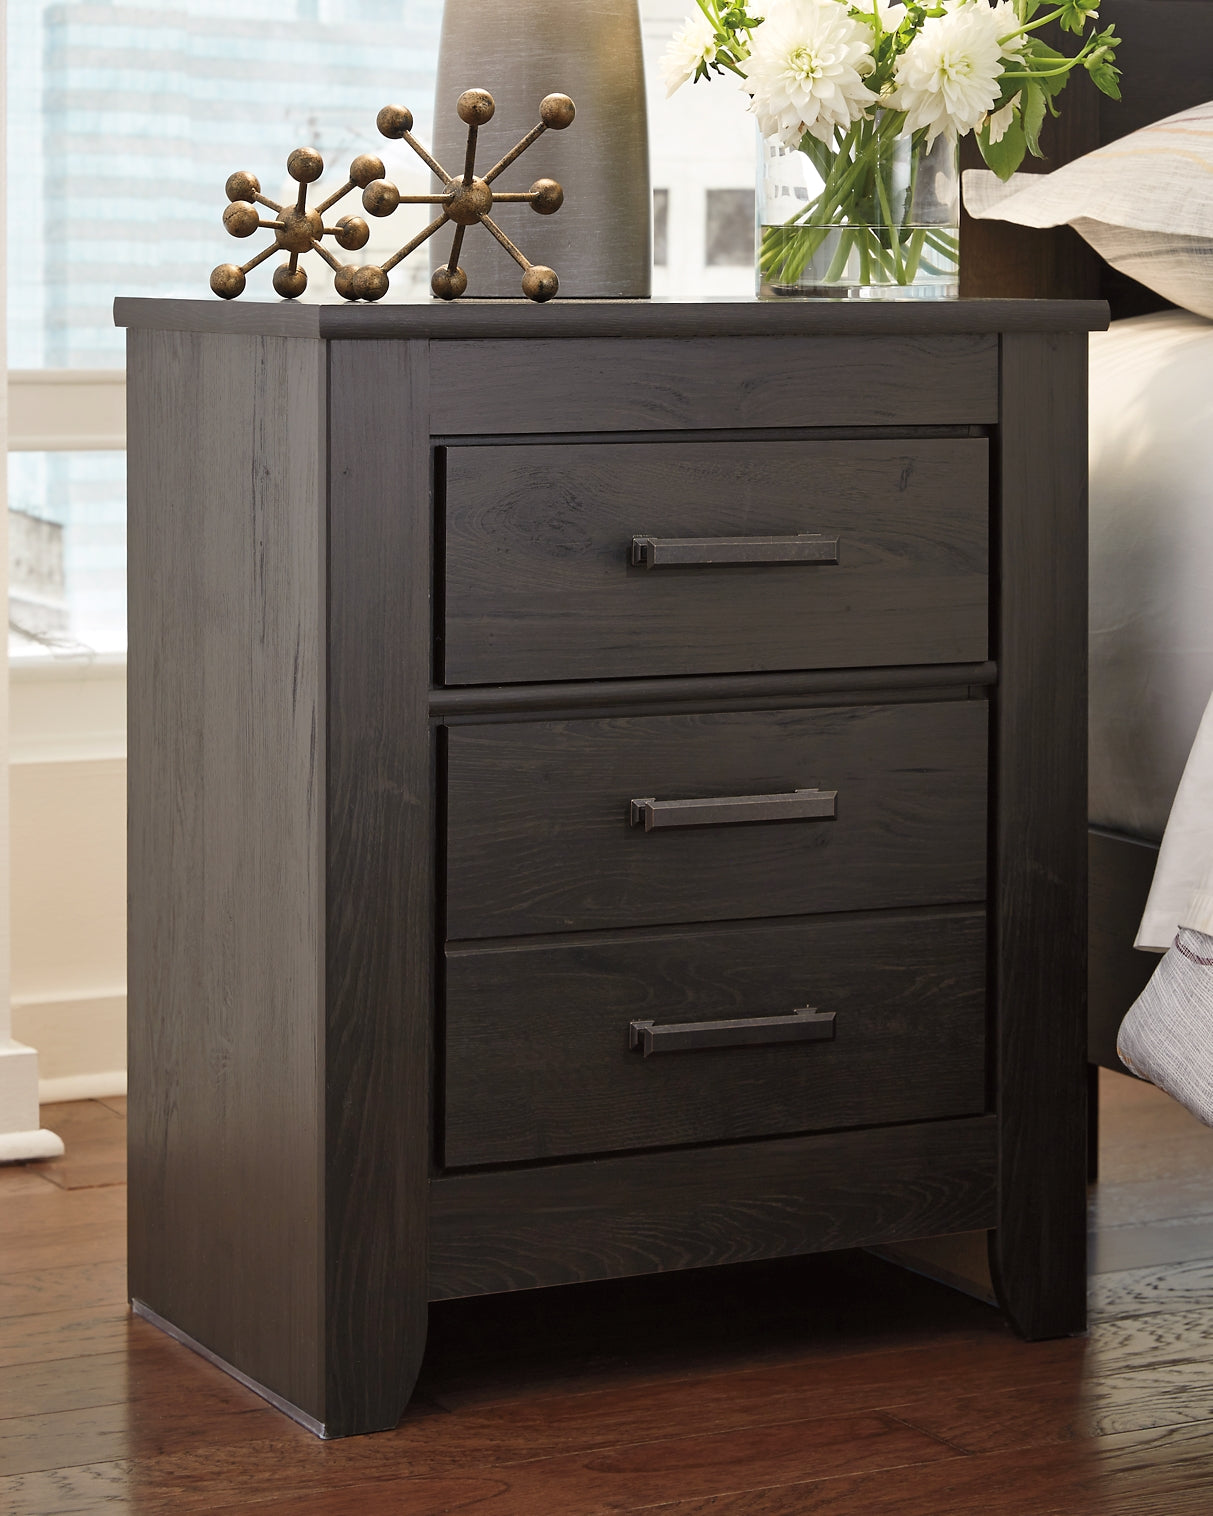 Brinxton Two Night Stand – Furniture & Cabinet Outlet Centers